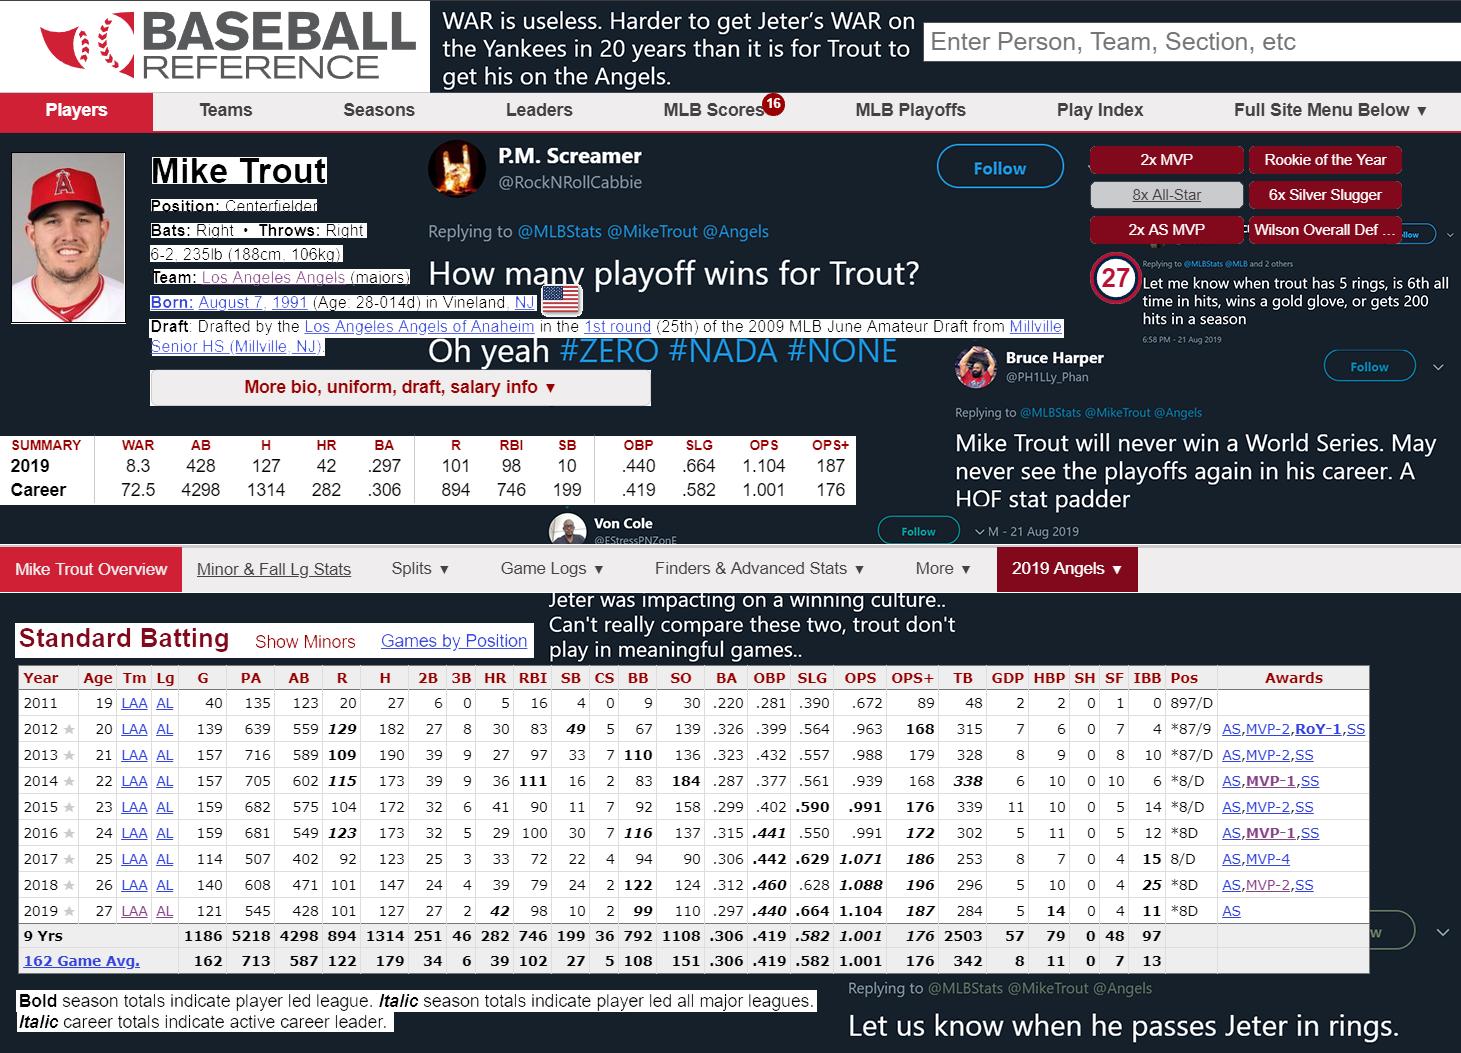 Baseball on Twitter: "Mike Trout's Baseball page, but the background is people mad about him surpassing Jeter in WAR. https://t.co/NzOnyb619N"